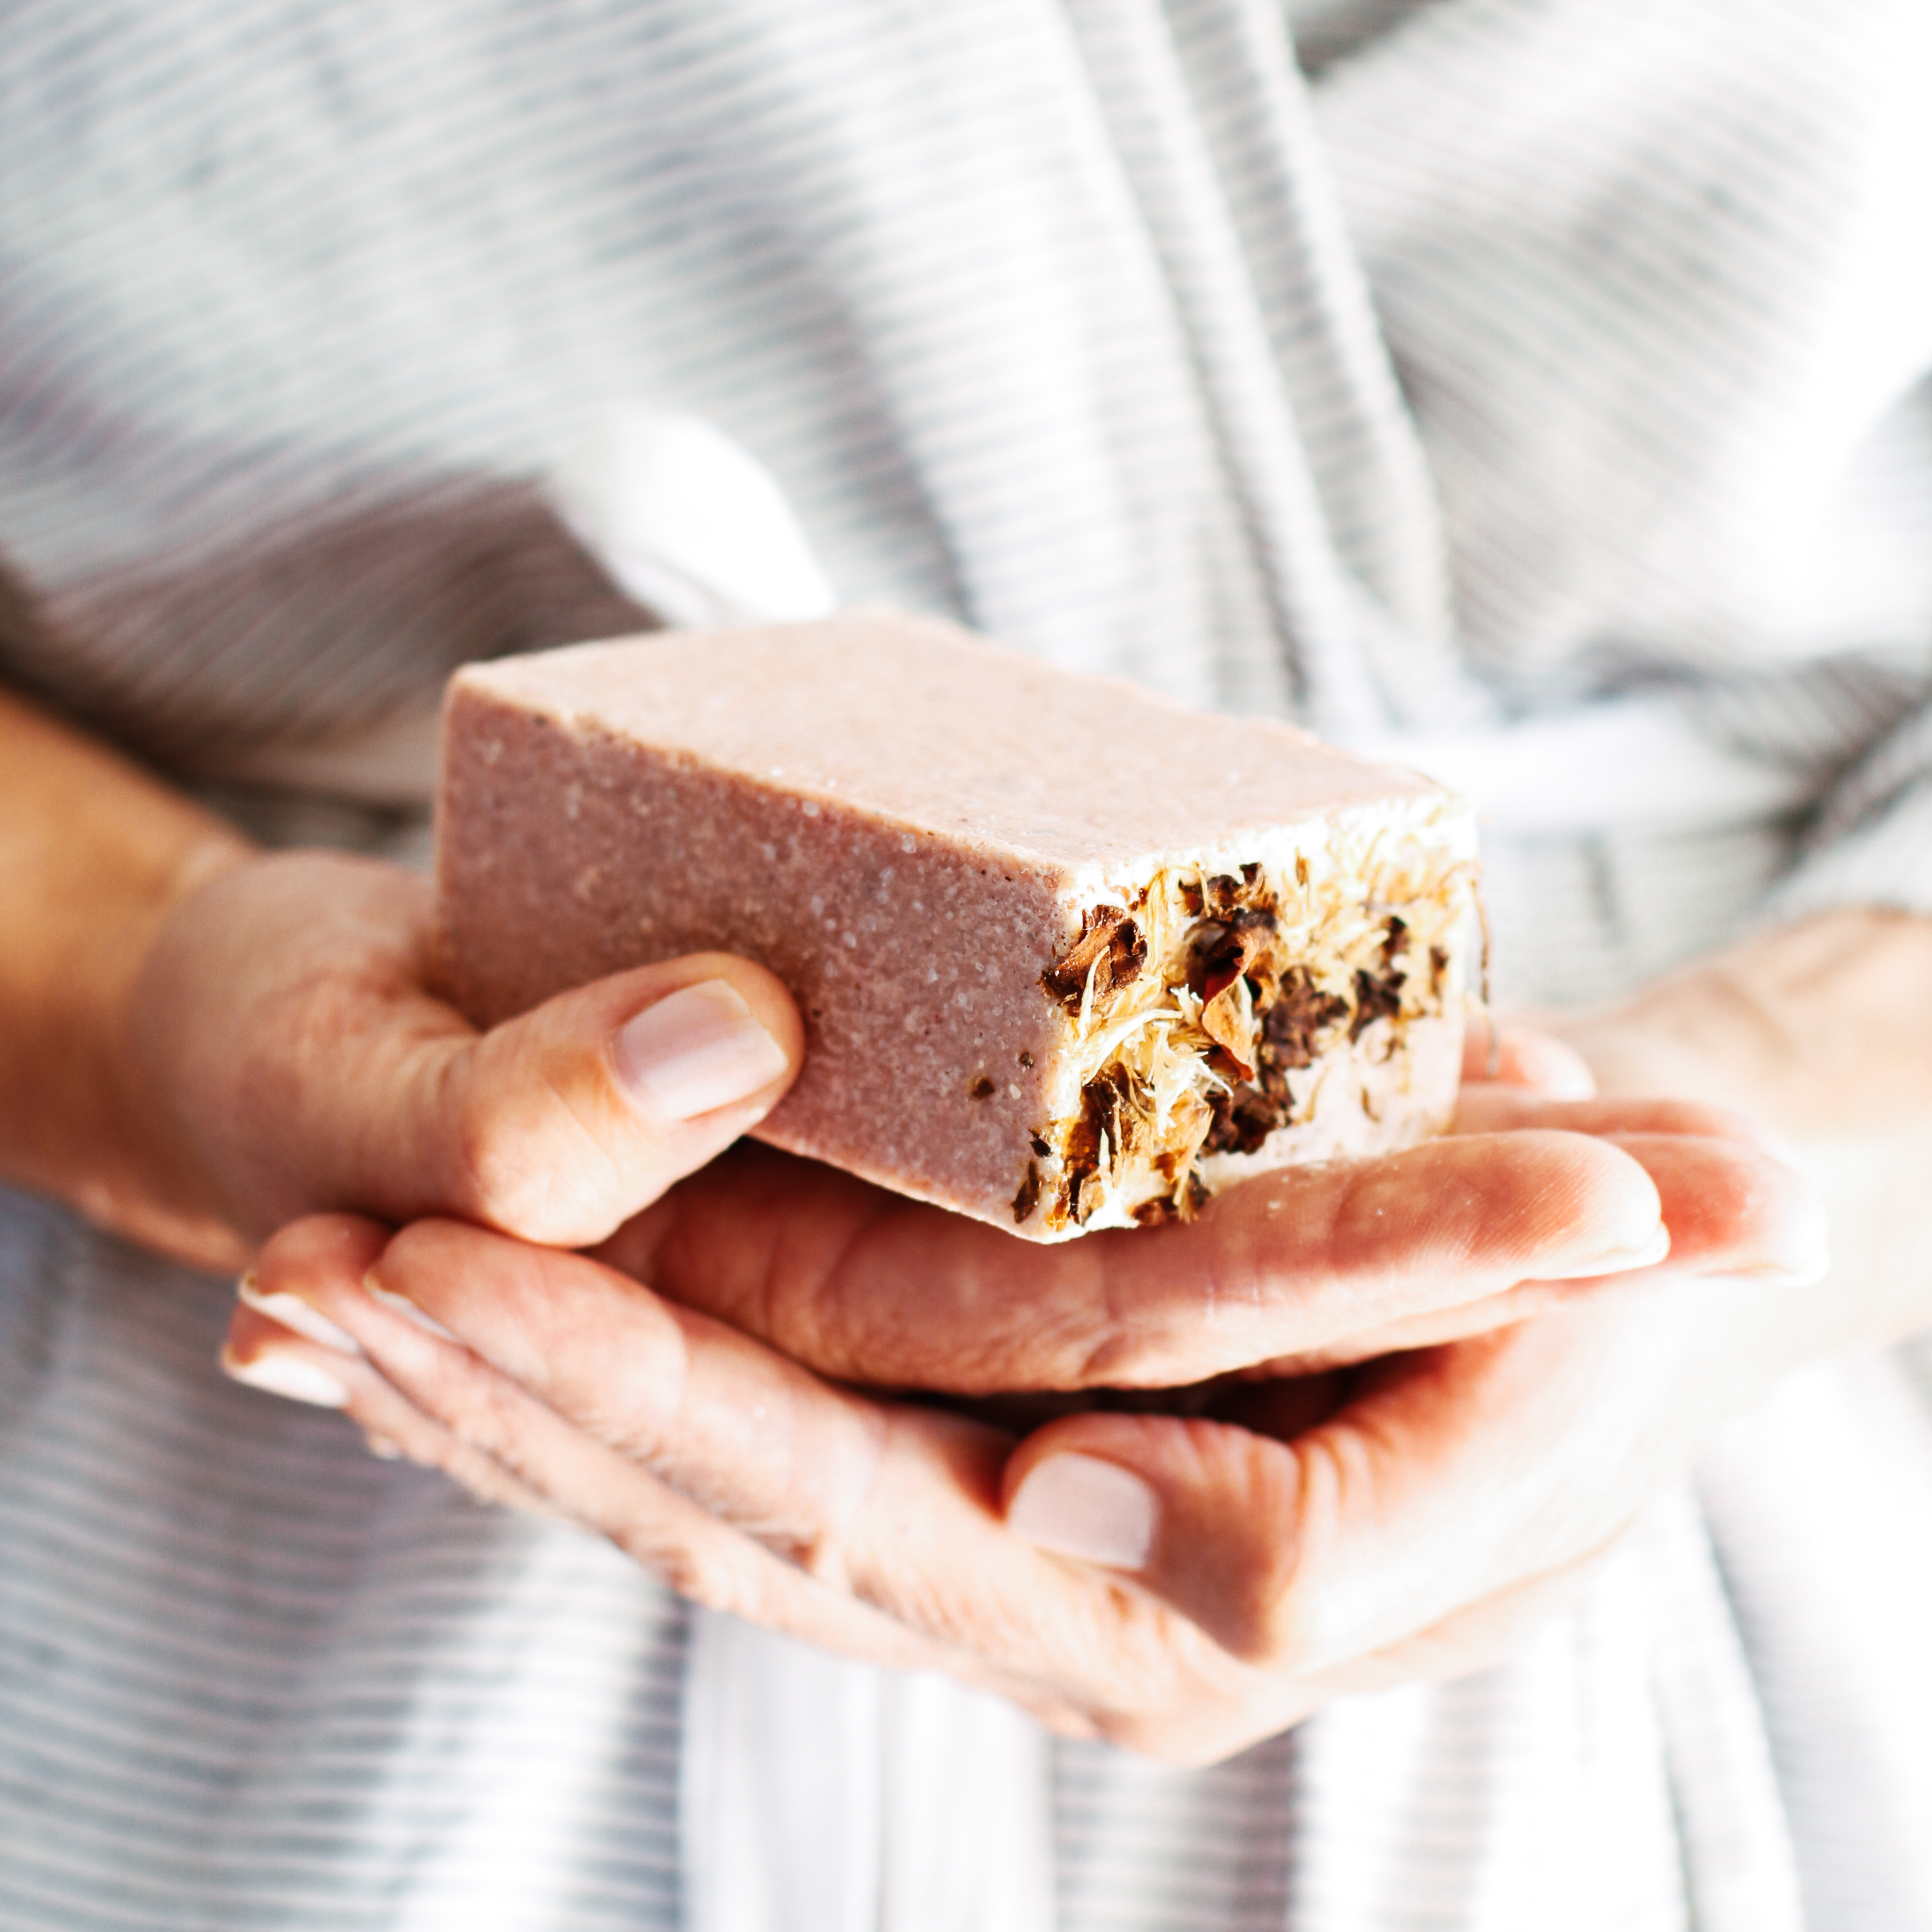 Are your soap bars 'sweating'?